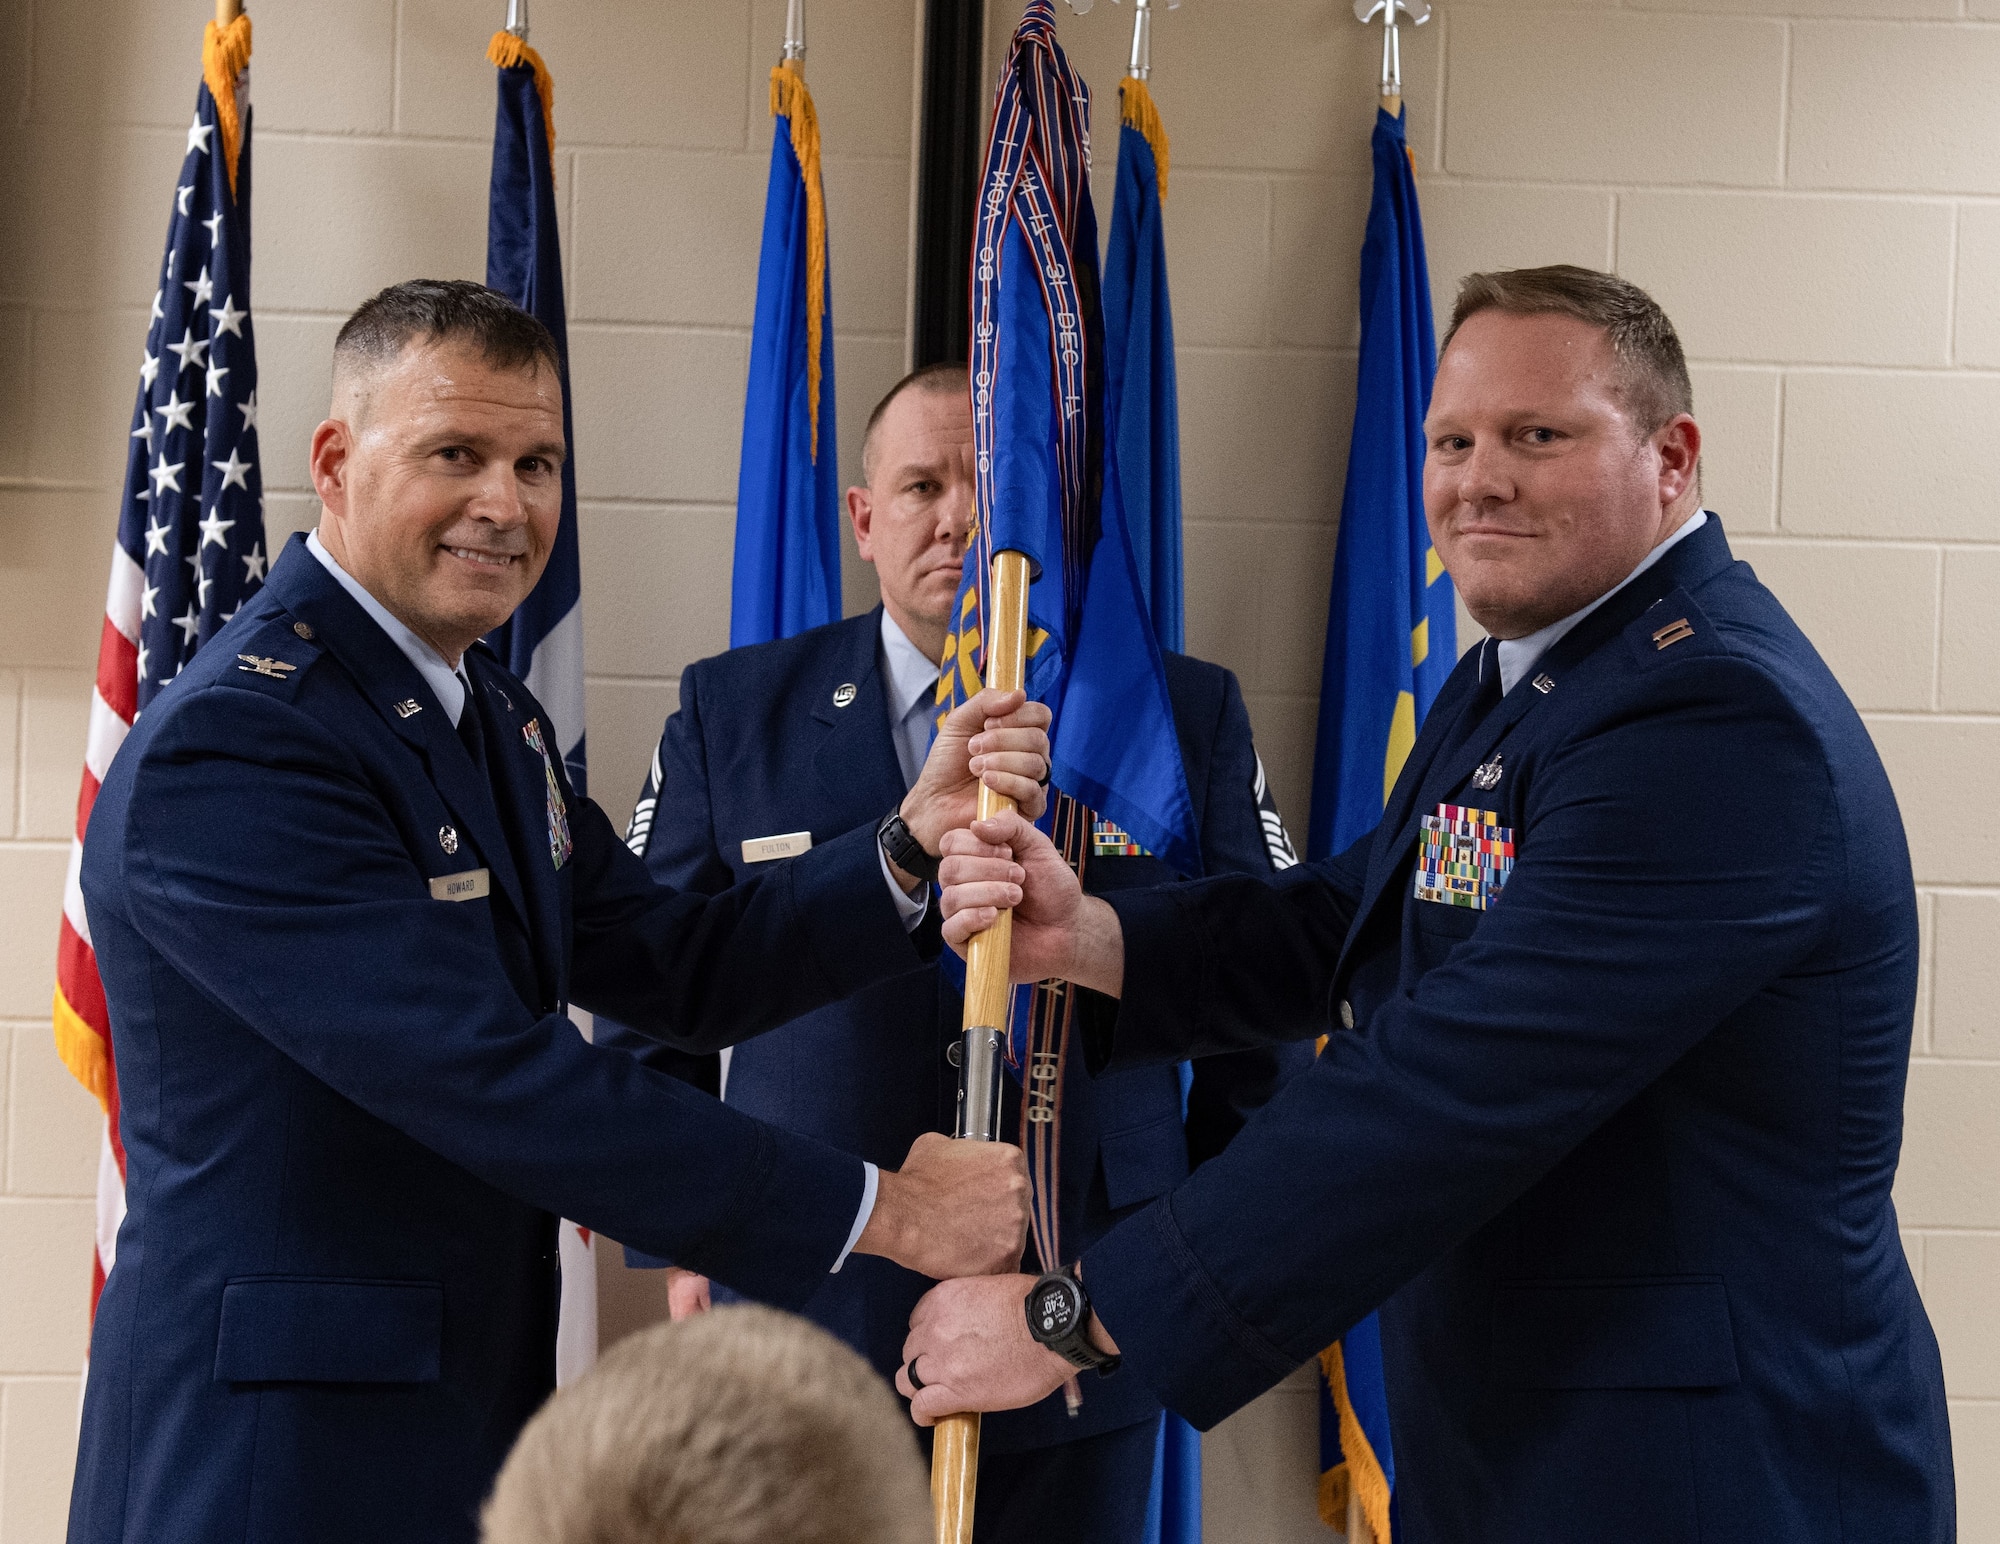 Two Airmen in dress blue uniforms grip a banner while posing for a photo